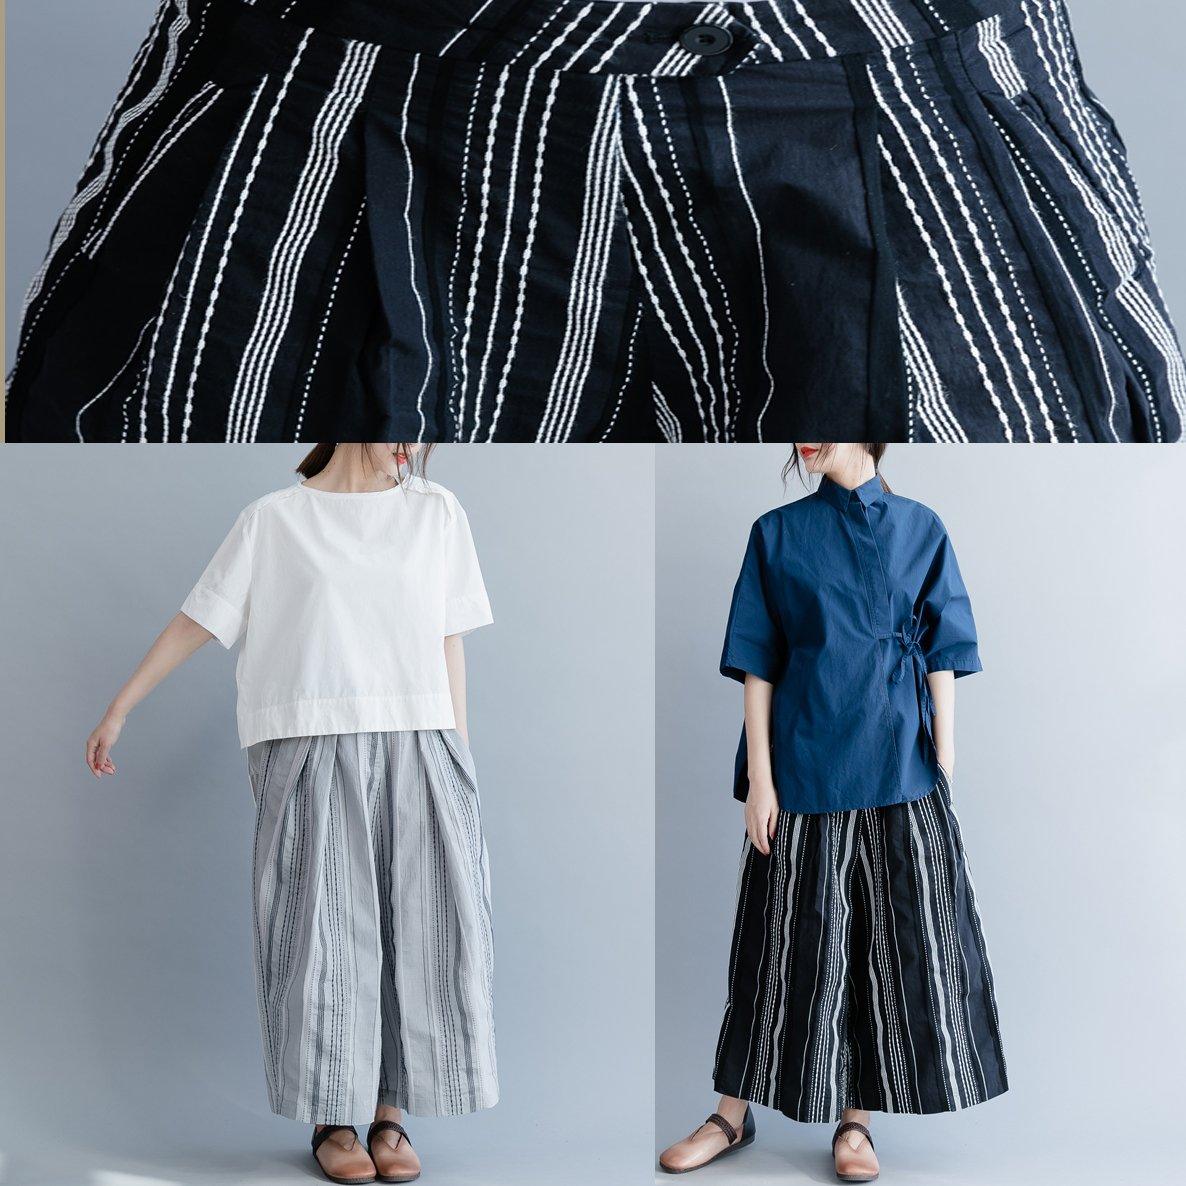 Natural black striped linen clothes Fitted pattern wide leg pants pockets baggy spring - Omychic